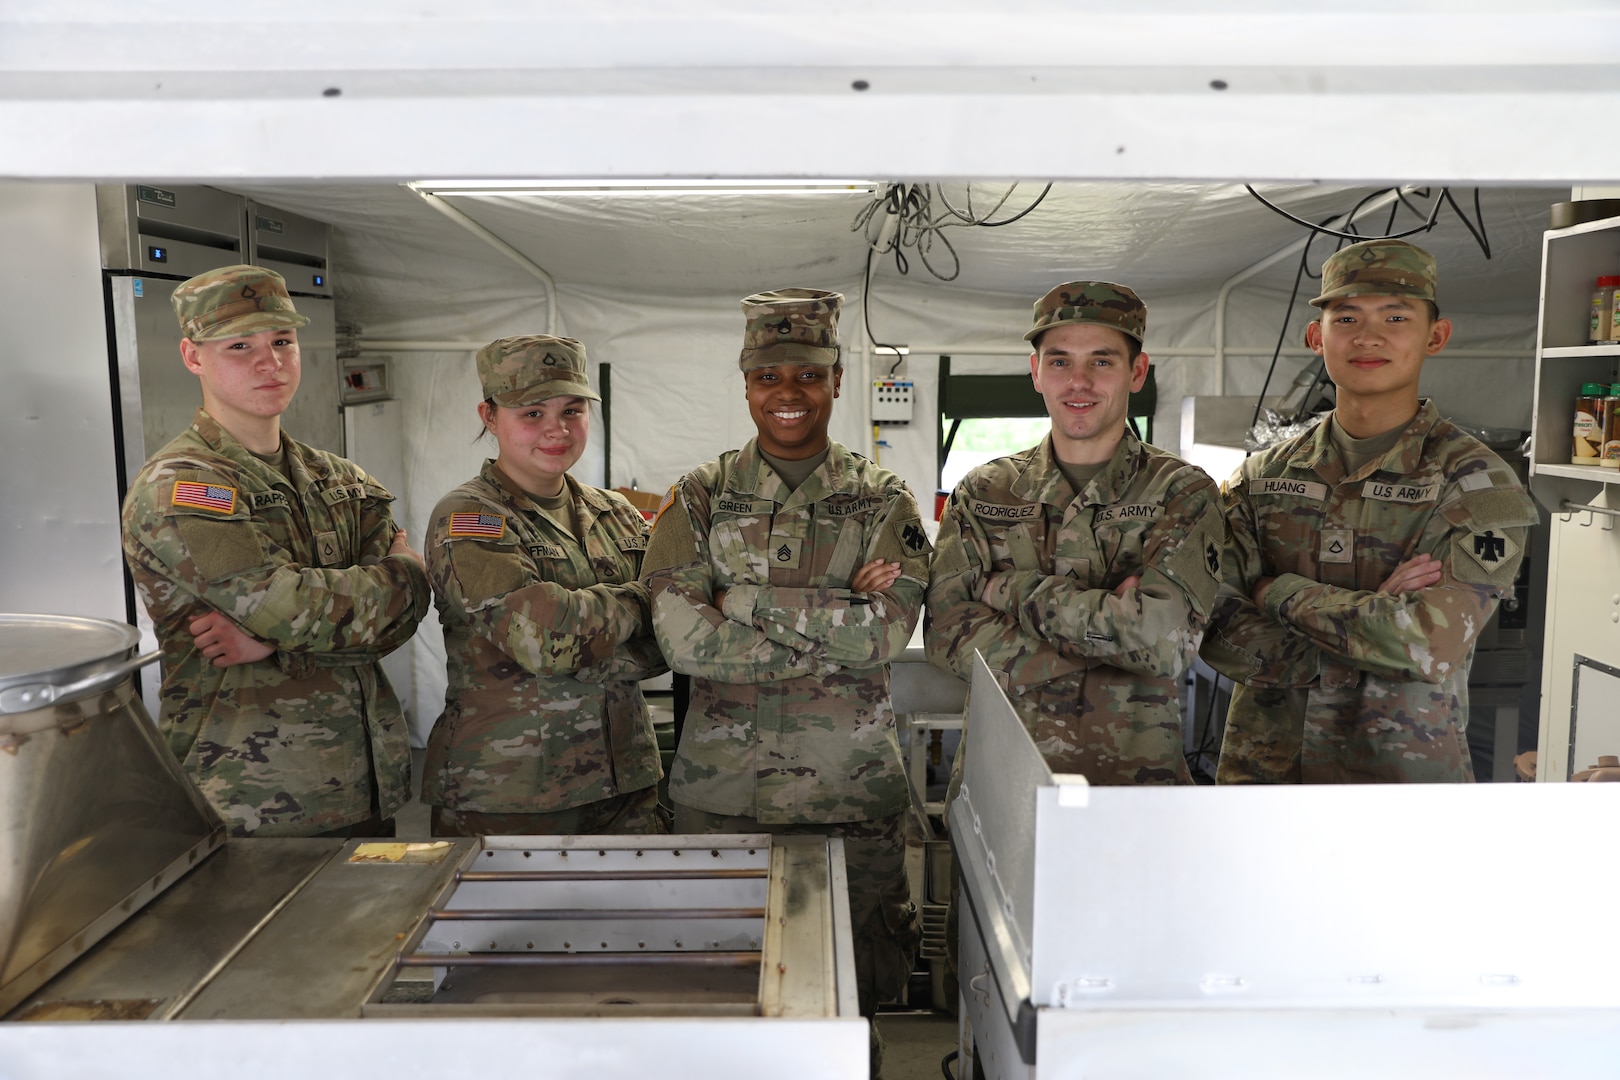 left to right: Pfc. Jeremiah Scrapper, culinary specialist, Pfc. Samantha Coffman, culinary specialist, Staff Sgt. Malikah Green, culinary noncommissioned officer, Pfc. Miguel Rodriguez, culinary specialist, and Pfc. Ziyu Huang, culinary specialist, all members of the 903rd Quartermaster Field Feeding Platoon, stand for a group photo during the inaugural OKARNG Culinary Excellence Challenge at Camp Gruber Training Center, April 27, 2024. The team from the 903rd took first place at the inaugural state-level culinary competition. (Oklahoma National Guard photo by Sgt. Elliott Kim)